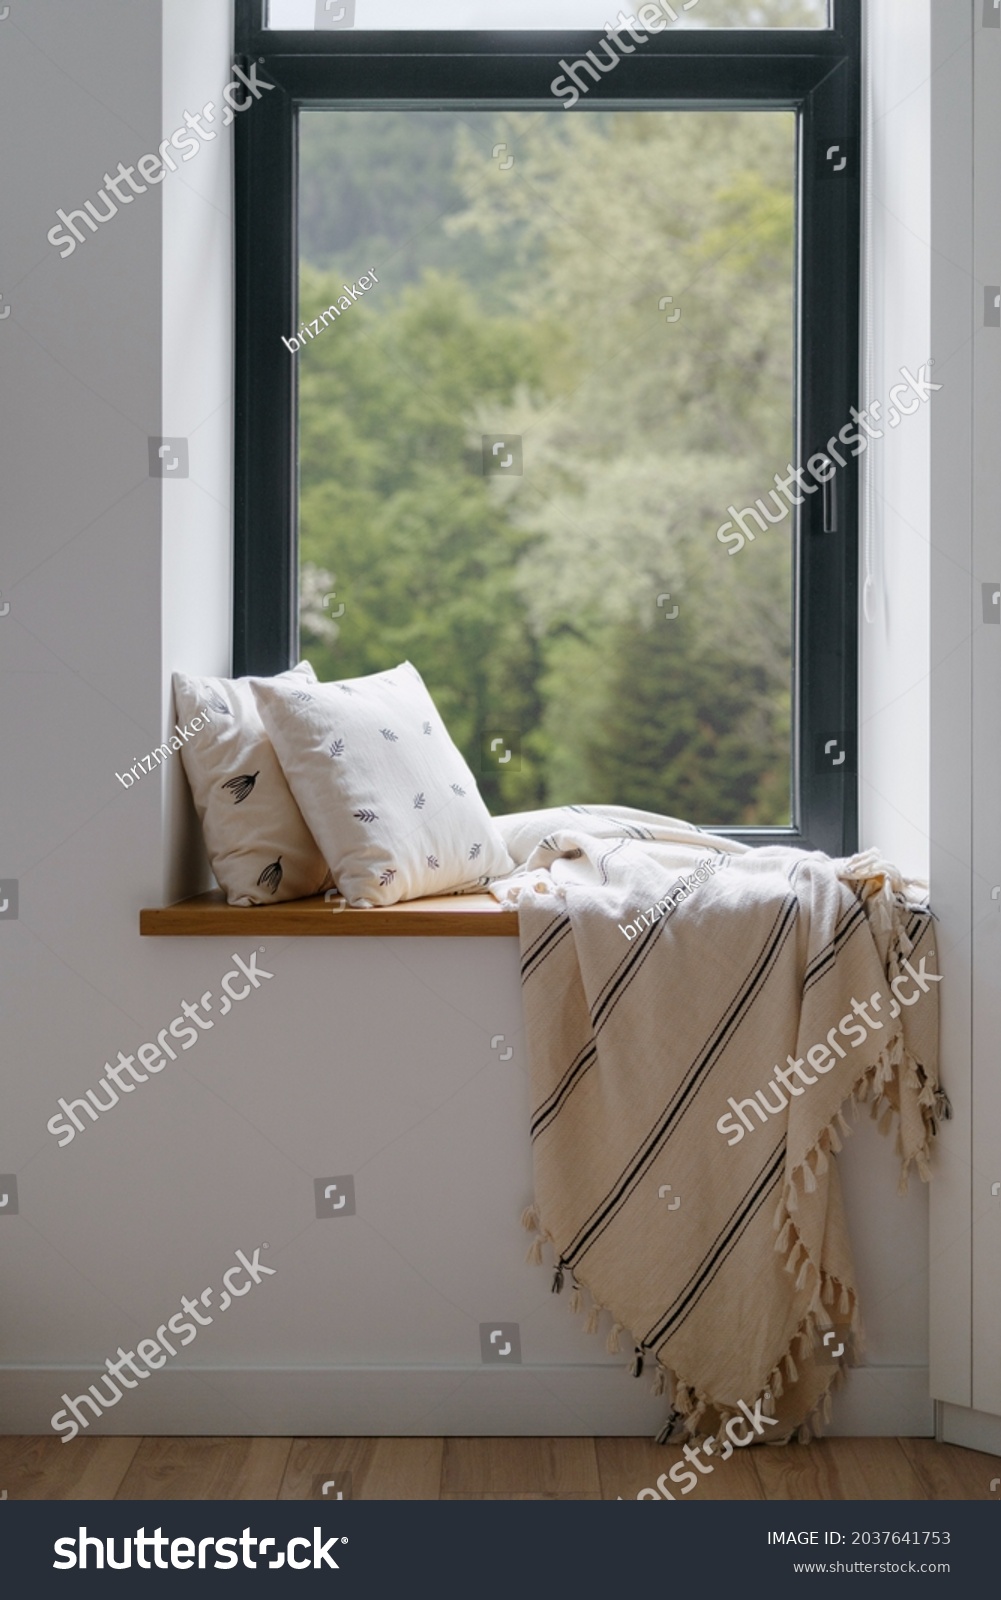 Home interior, cozy house room with blanket at window. Modern hygge design of relax place at windowsill, pillow decor for rest indoor. Nobody at comfortable sill with natural background. #2037641753